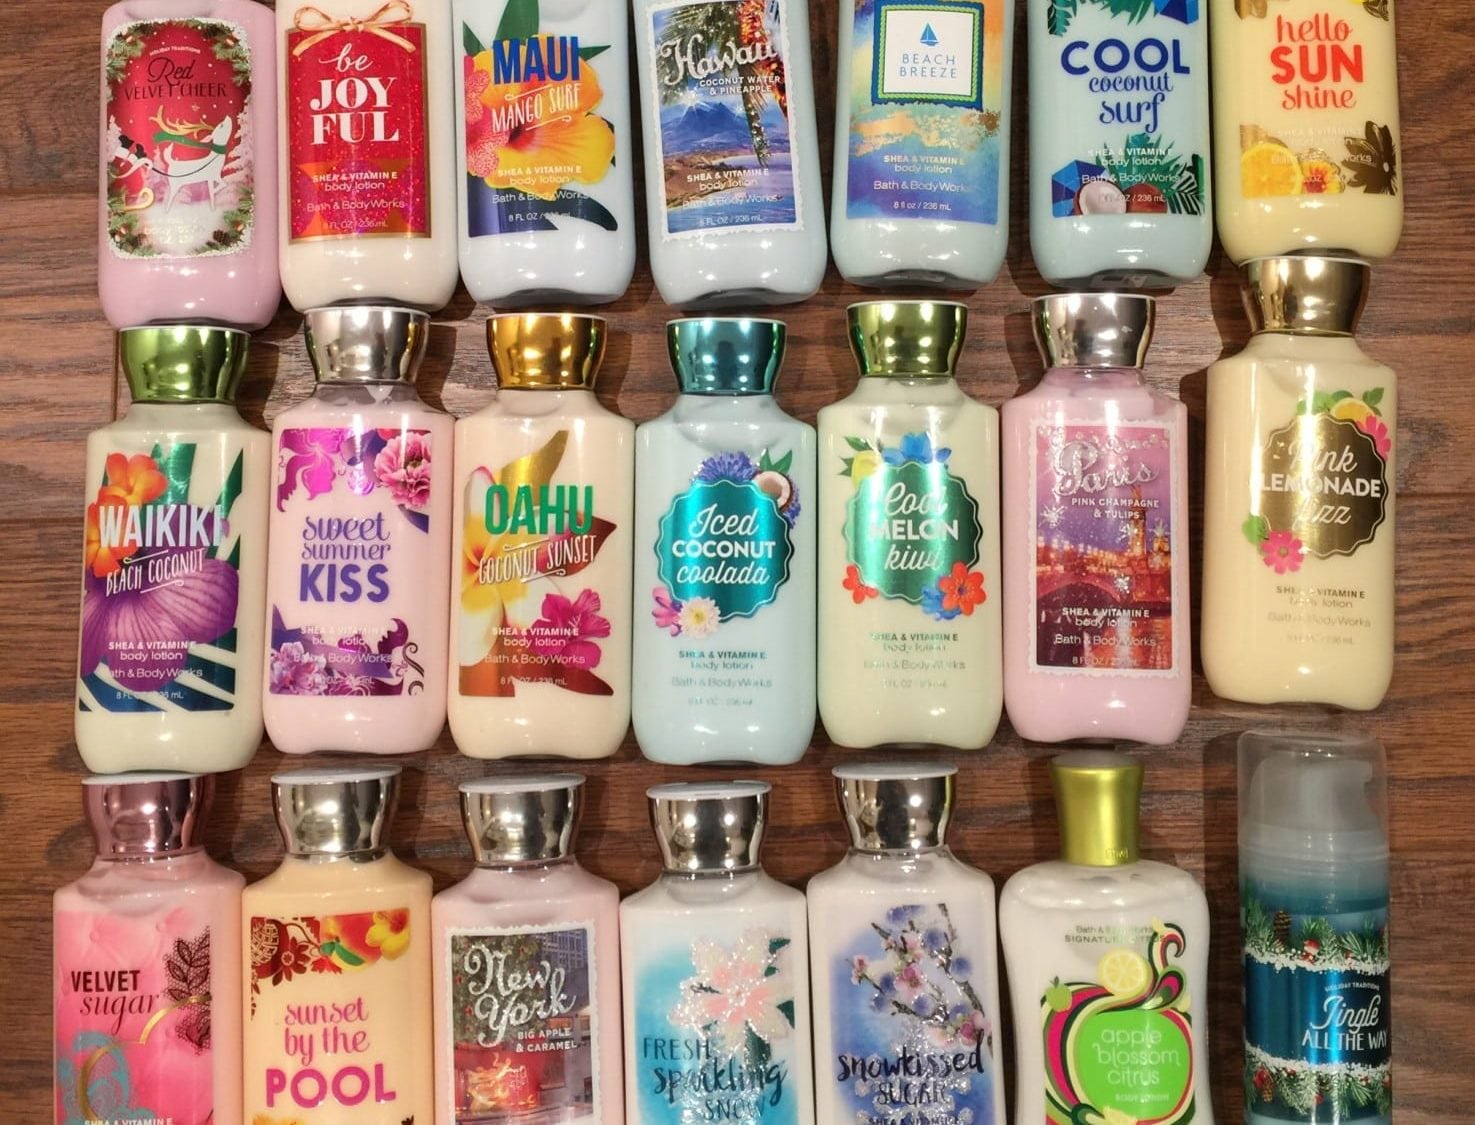 Bath Body Works #39 massive semi annual sale is on now Get 75% off